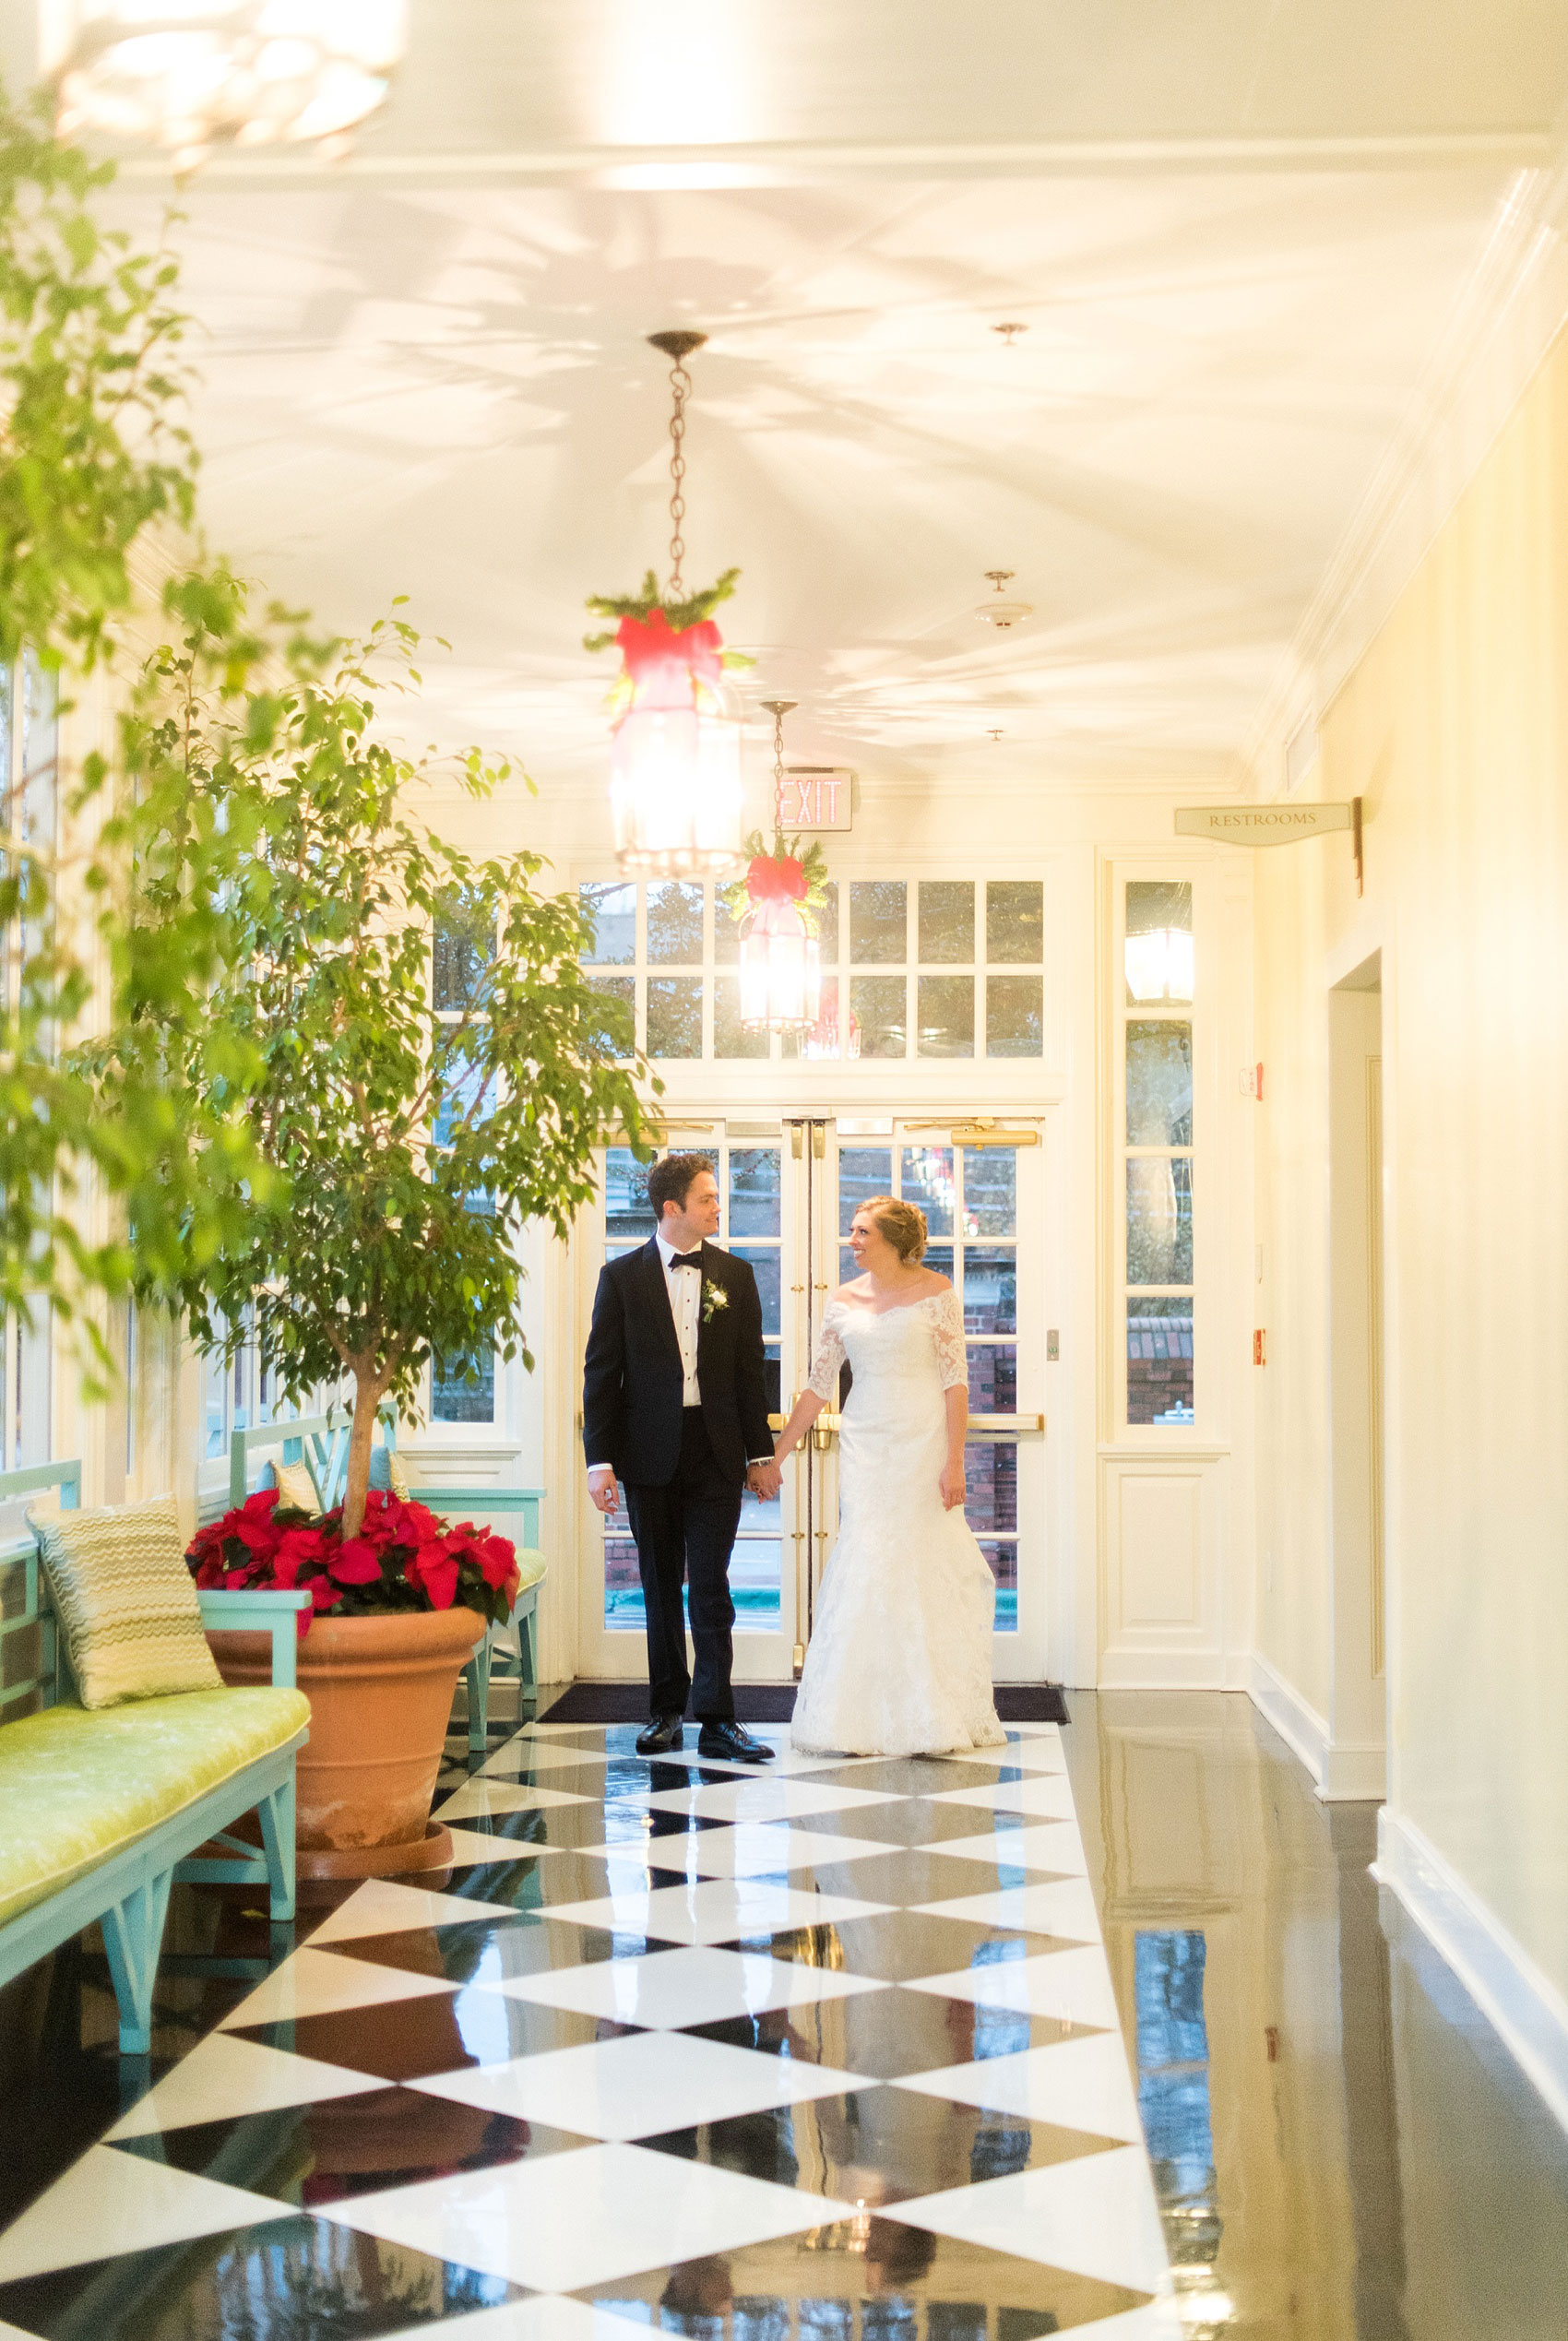 Beautiful wedding photos at The Carolina Inn at Chapel Hill, North Carolina by Mikkel Paige Photography. Picture of the bride and groom walking through the hallway with a black and white checkerboard floor. Click through to see the rest of this gorgeous winter wedding! #thecarolinainn #snowywedding